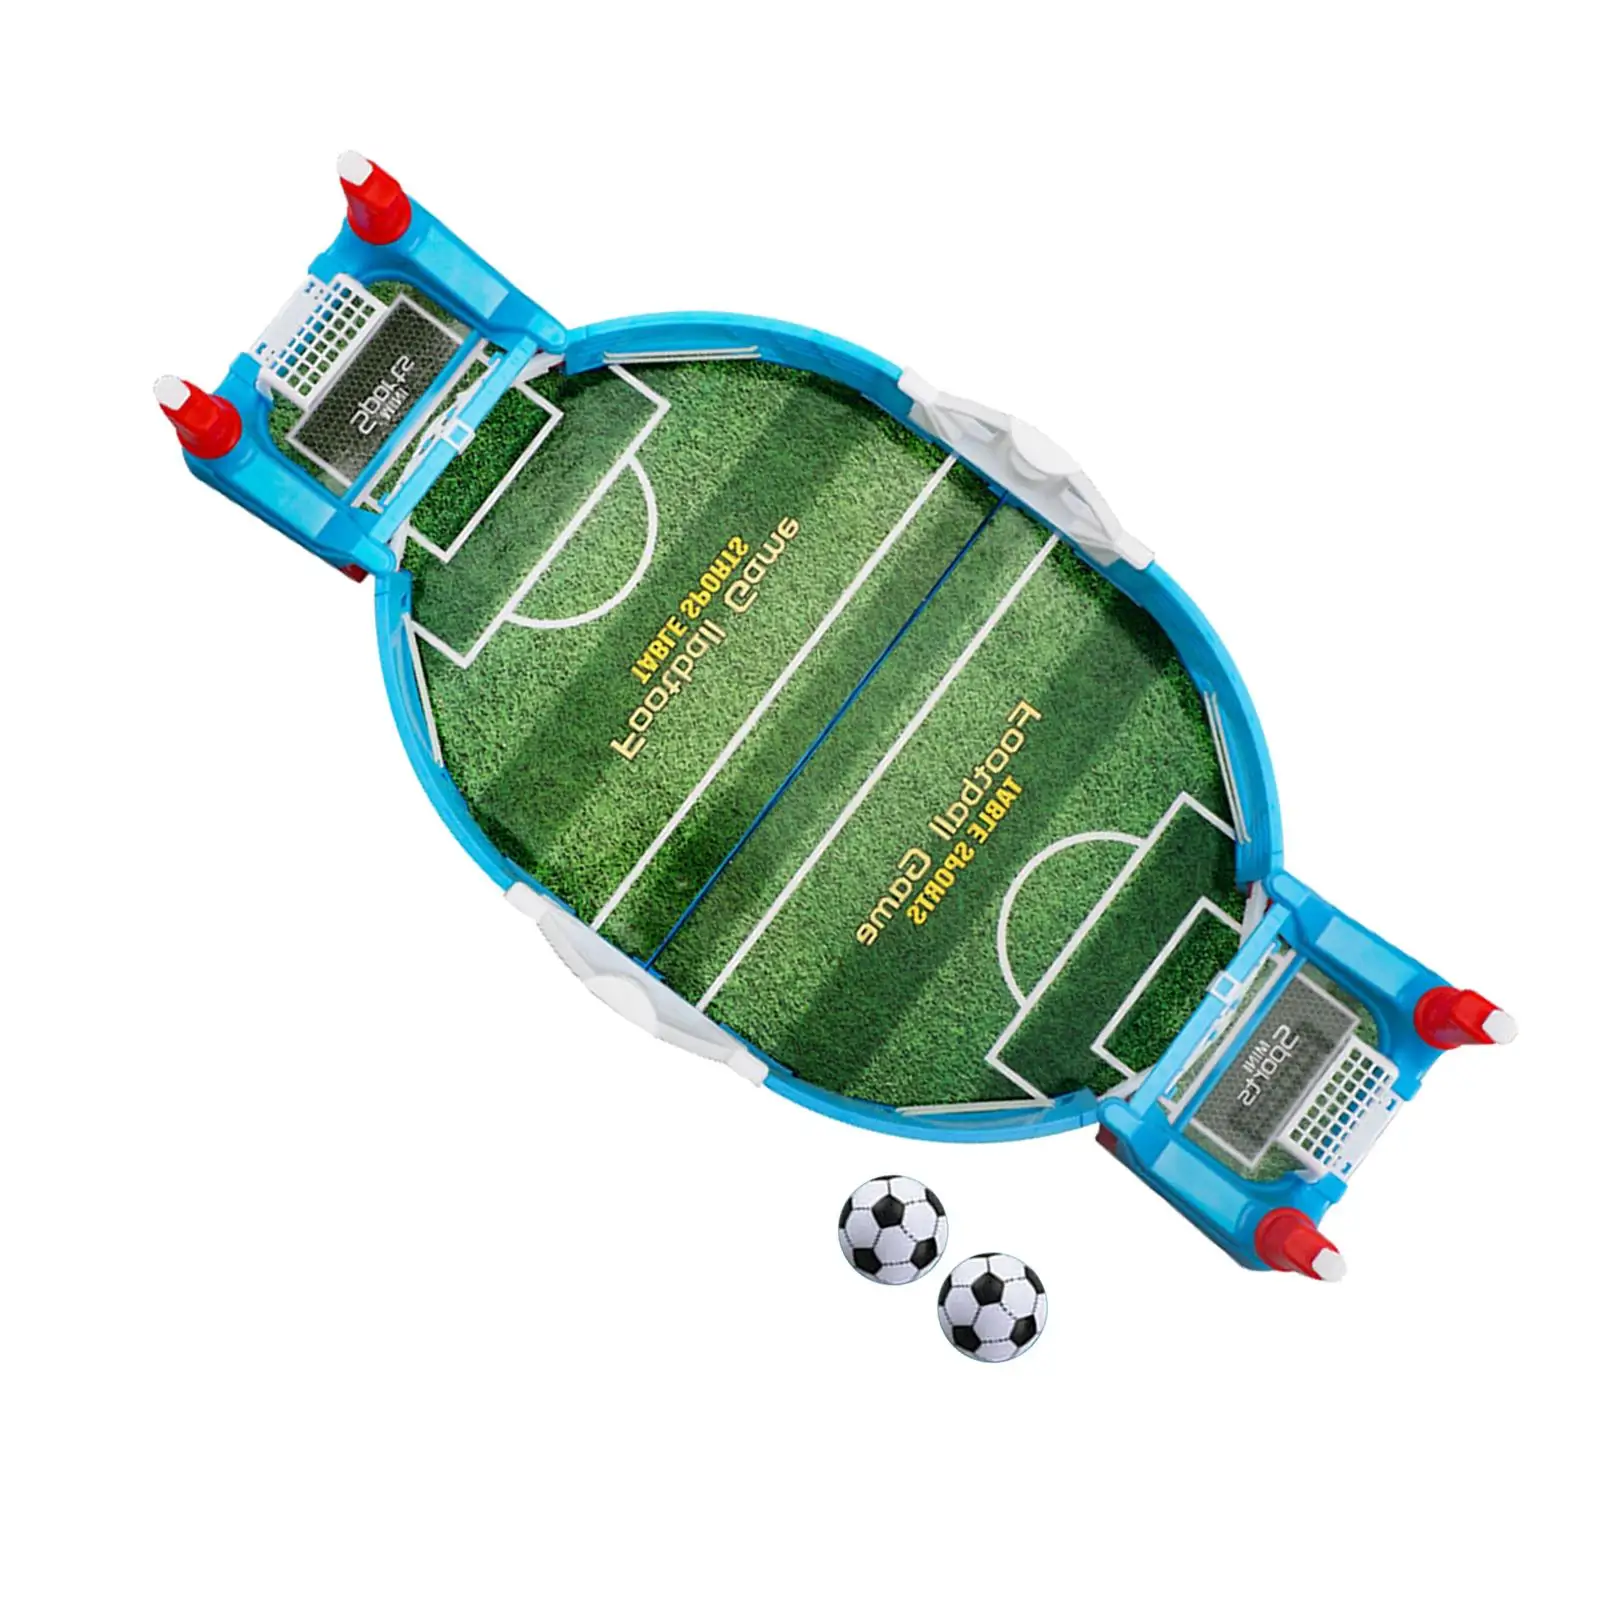 Desktop Football Board Games Kit Indoor Toy Sports Table Soccer Football Game Interactive Toys for Girls Adults Kids Boys